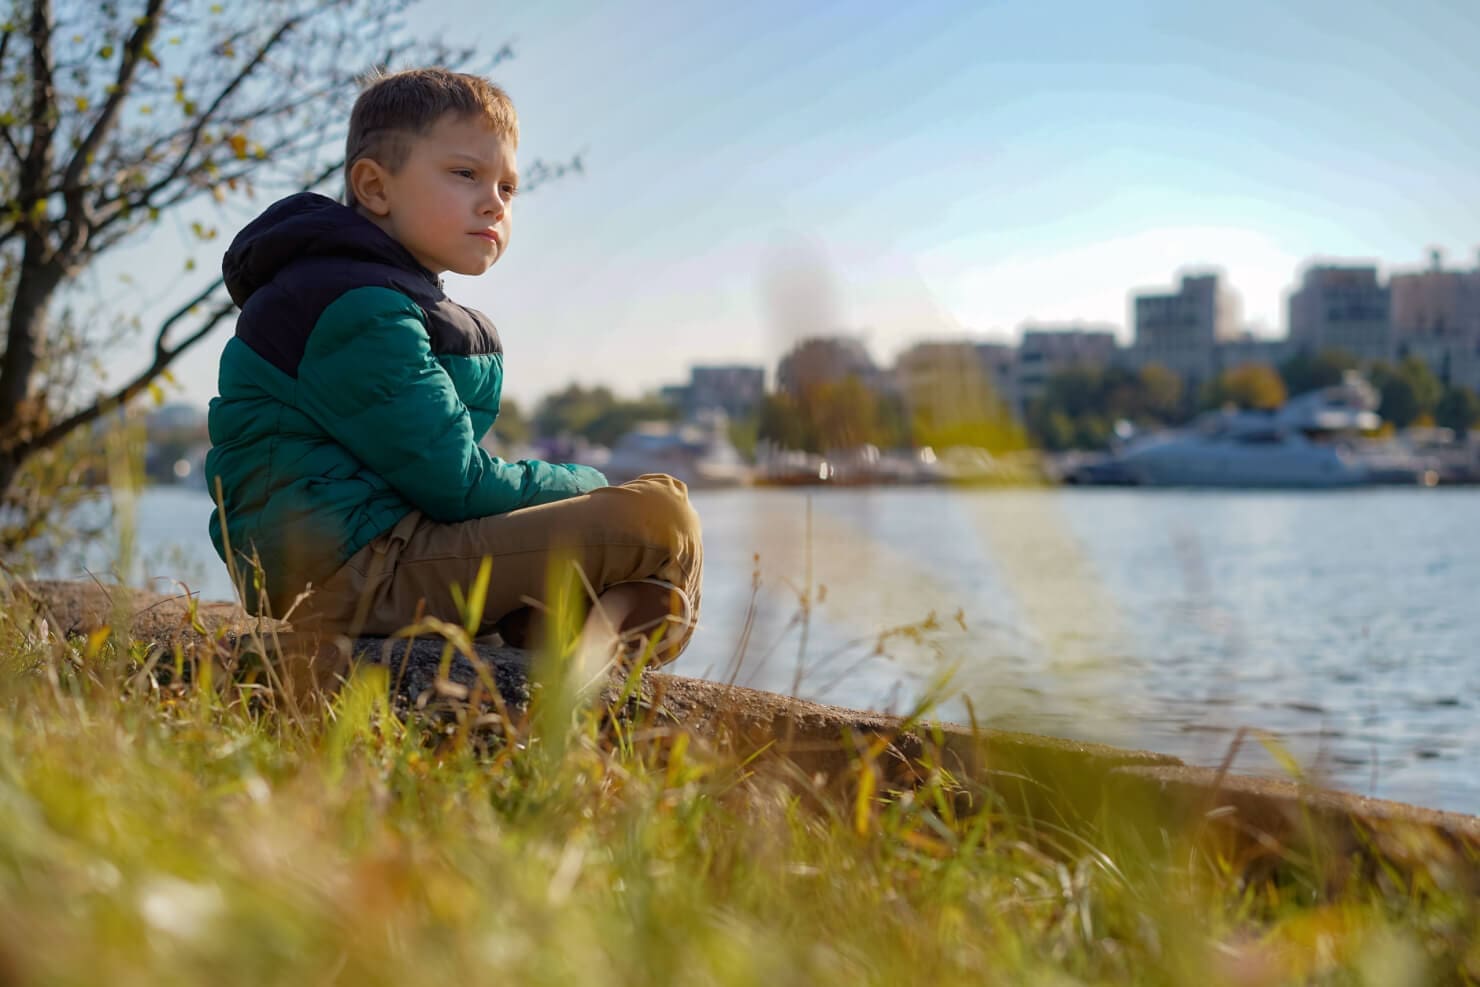 A young boy peacefully sitting on the shore of a lake.